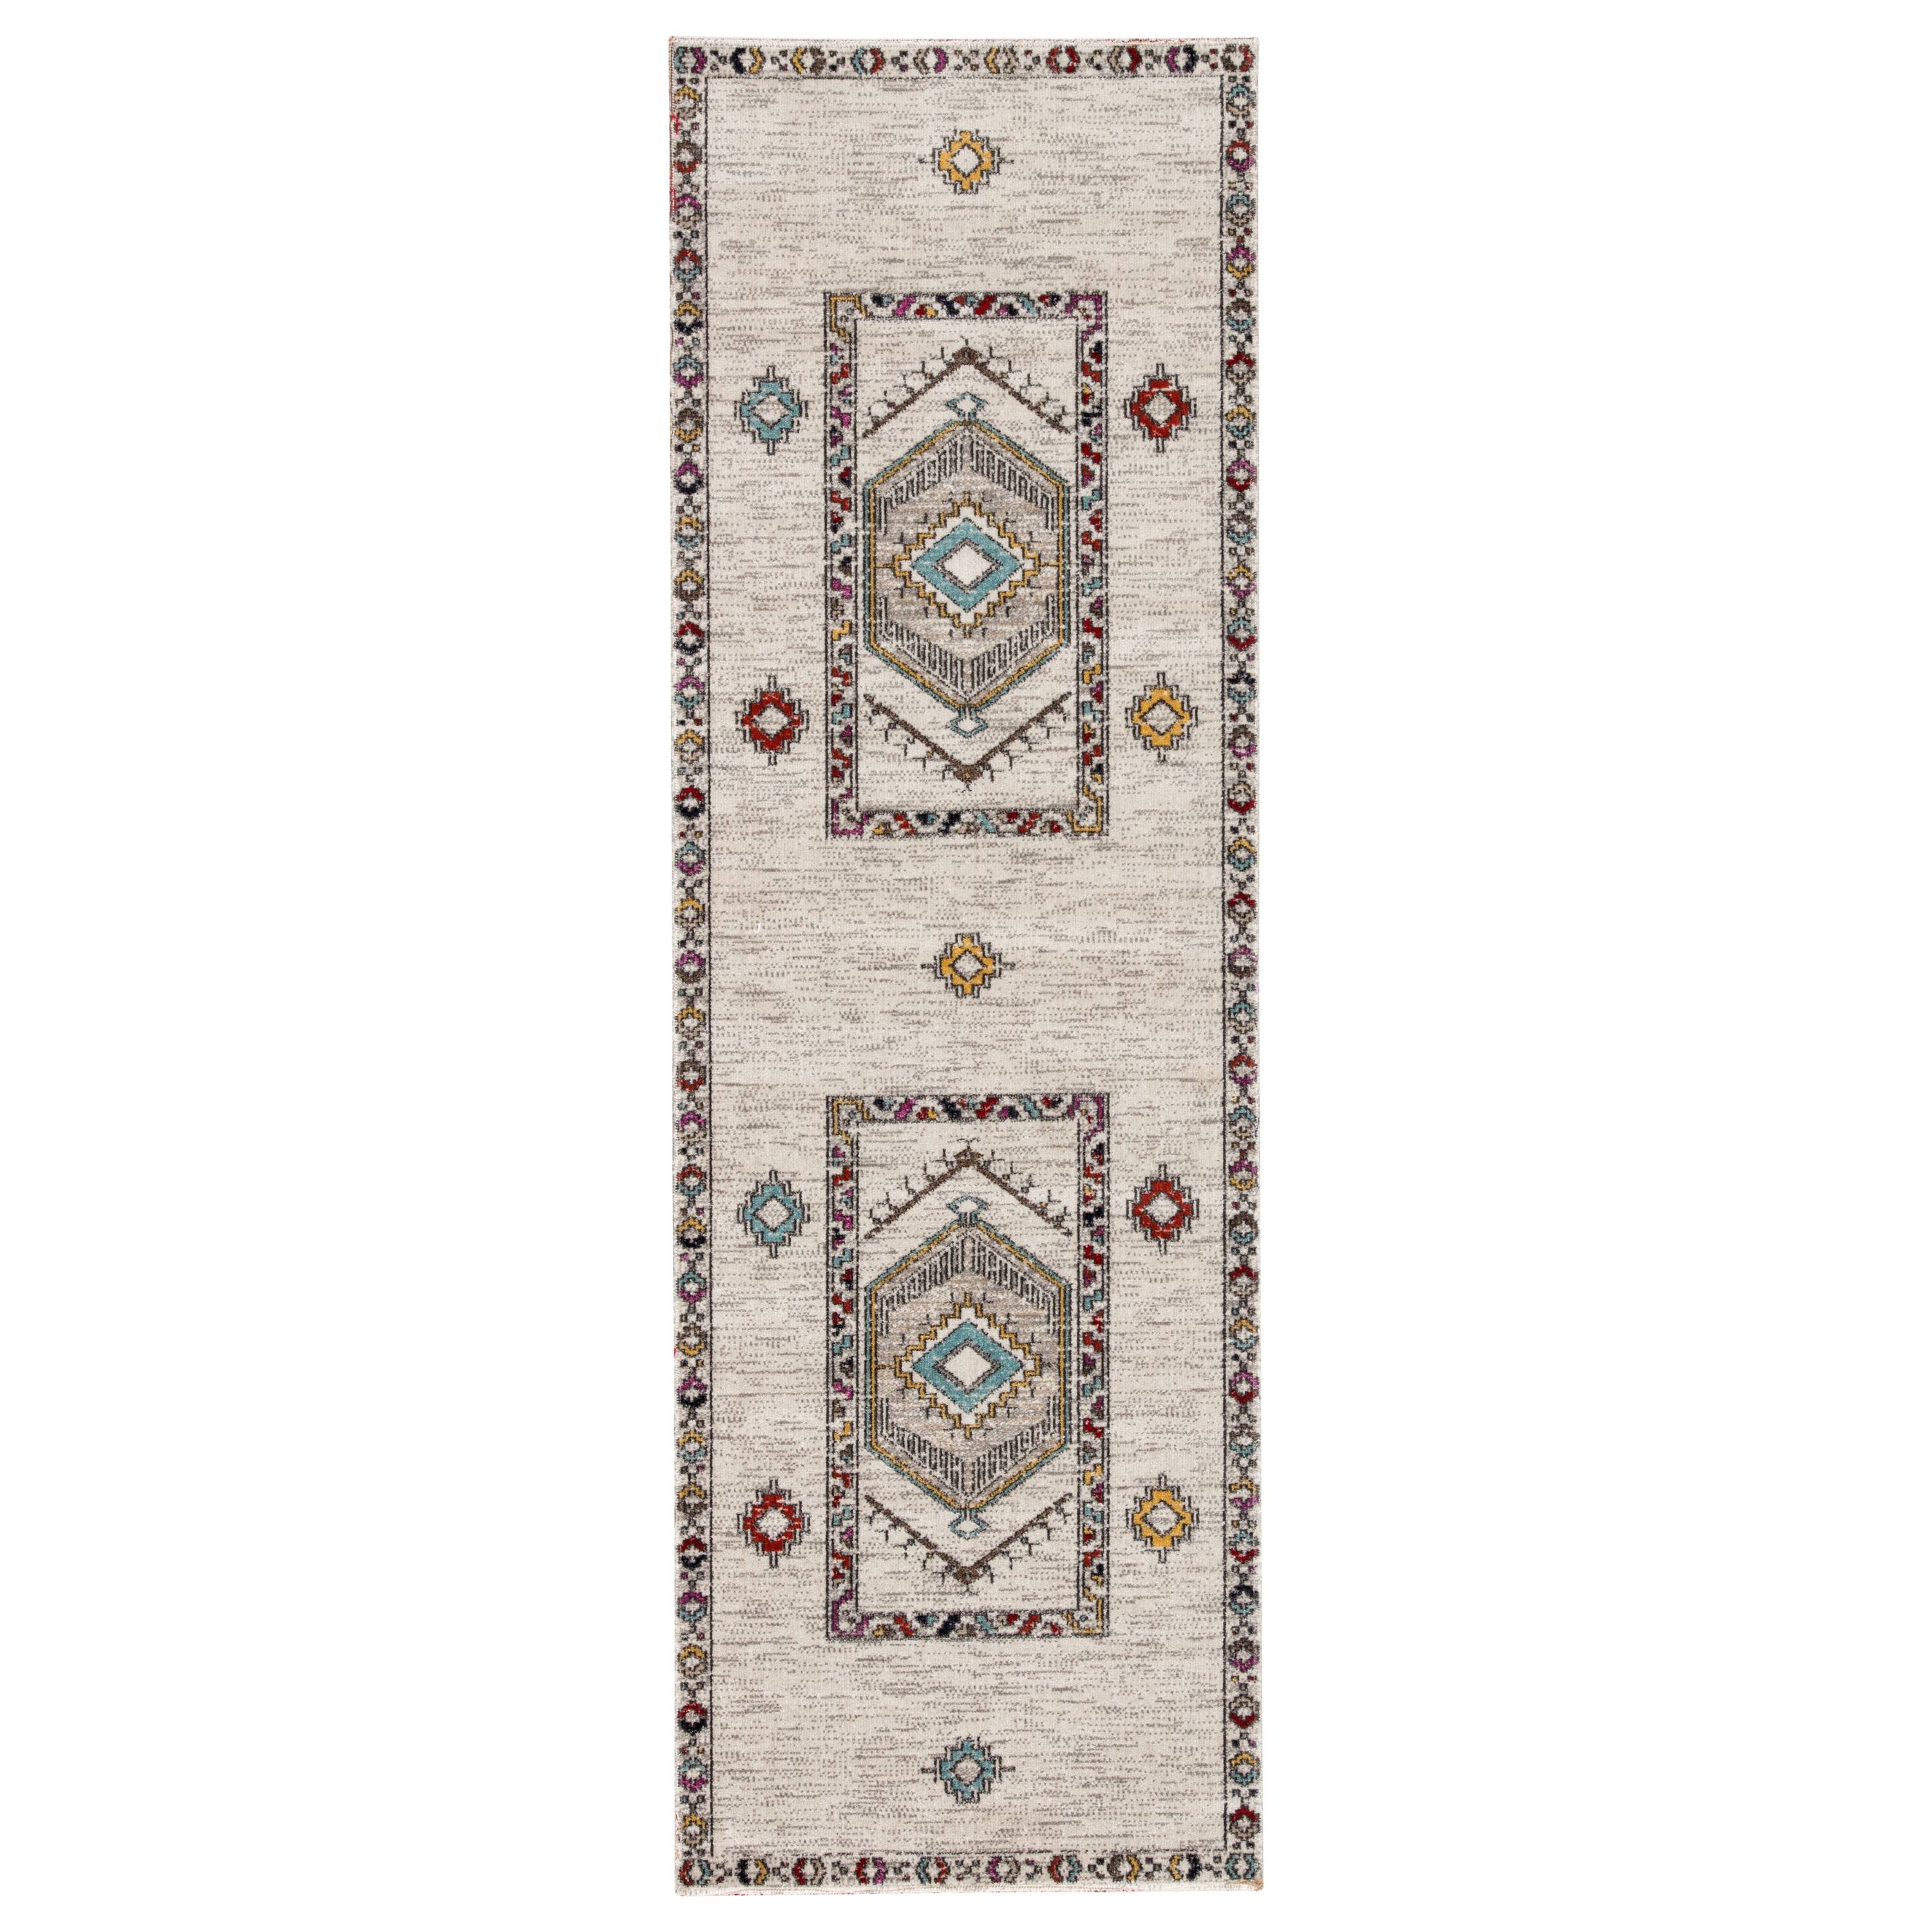 The Curated Nomad Don Chee Tribal Medallion Indoor/ Outdoor Area Rug